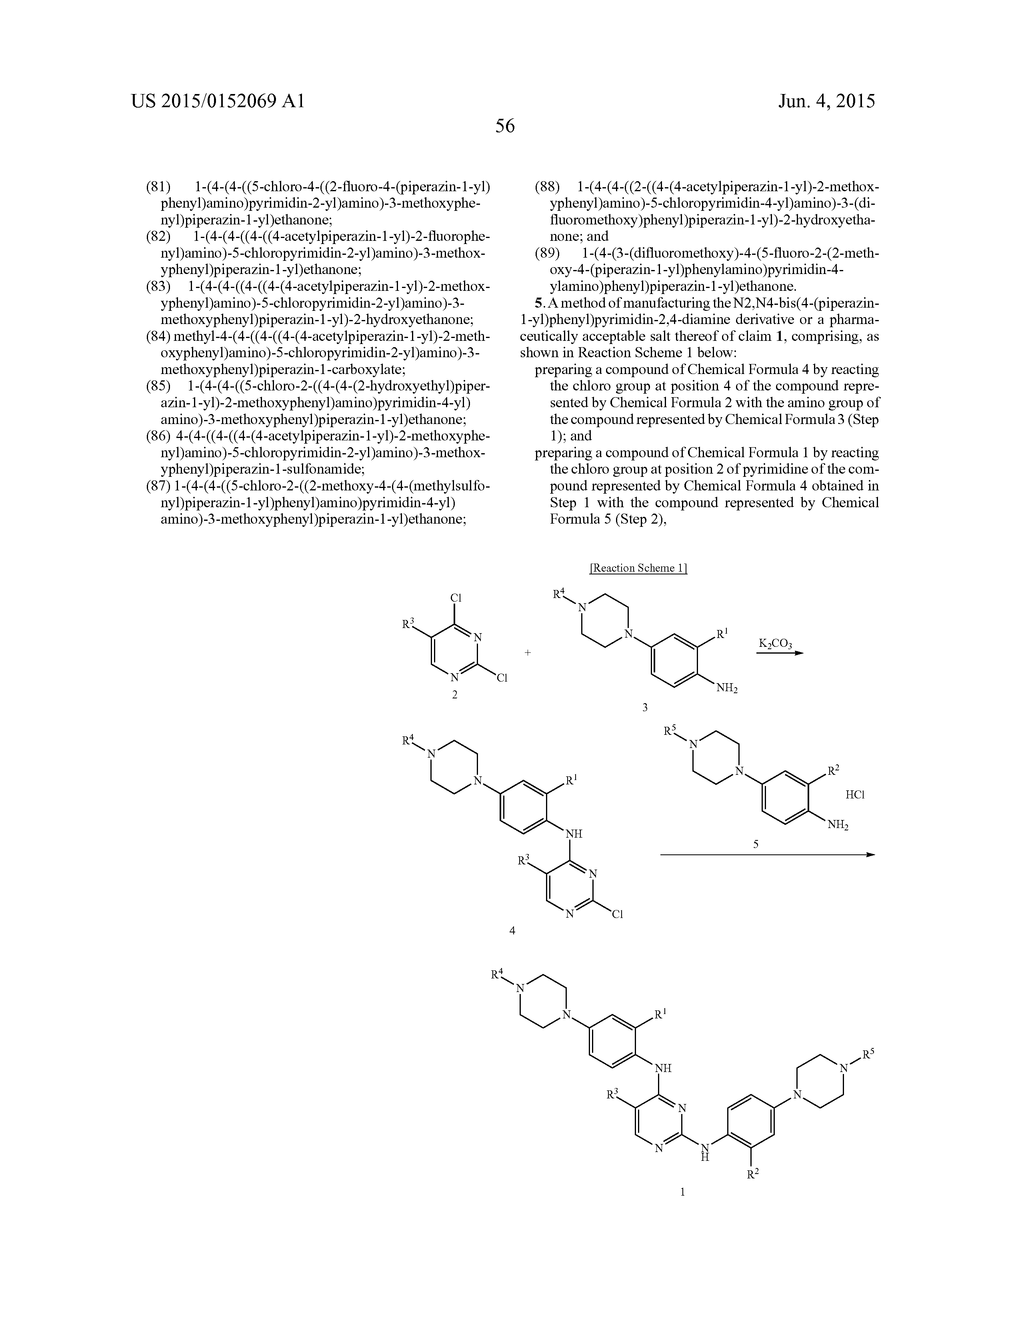 N2,N4-BIS(4-(PIPERAZINE-1-YL)PHENYL)PIRIMIDINE-2,4-DIAMINE DERIVATIVE OR     PHARMACEUTICALLY ACCEPTABLE SALT THEREOF, AND COMPOSITION CONTAINING SAME     AS ACTIVE INGREDIENT FOR PREVENTING OR TREATING CANCER - diagram, schematic, and image 60